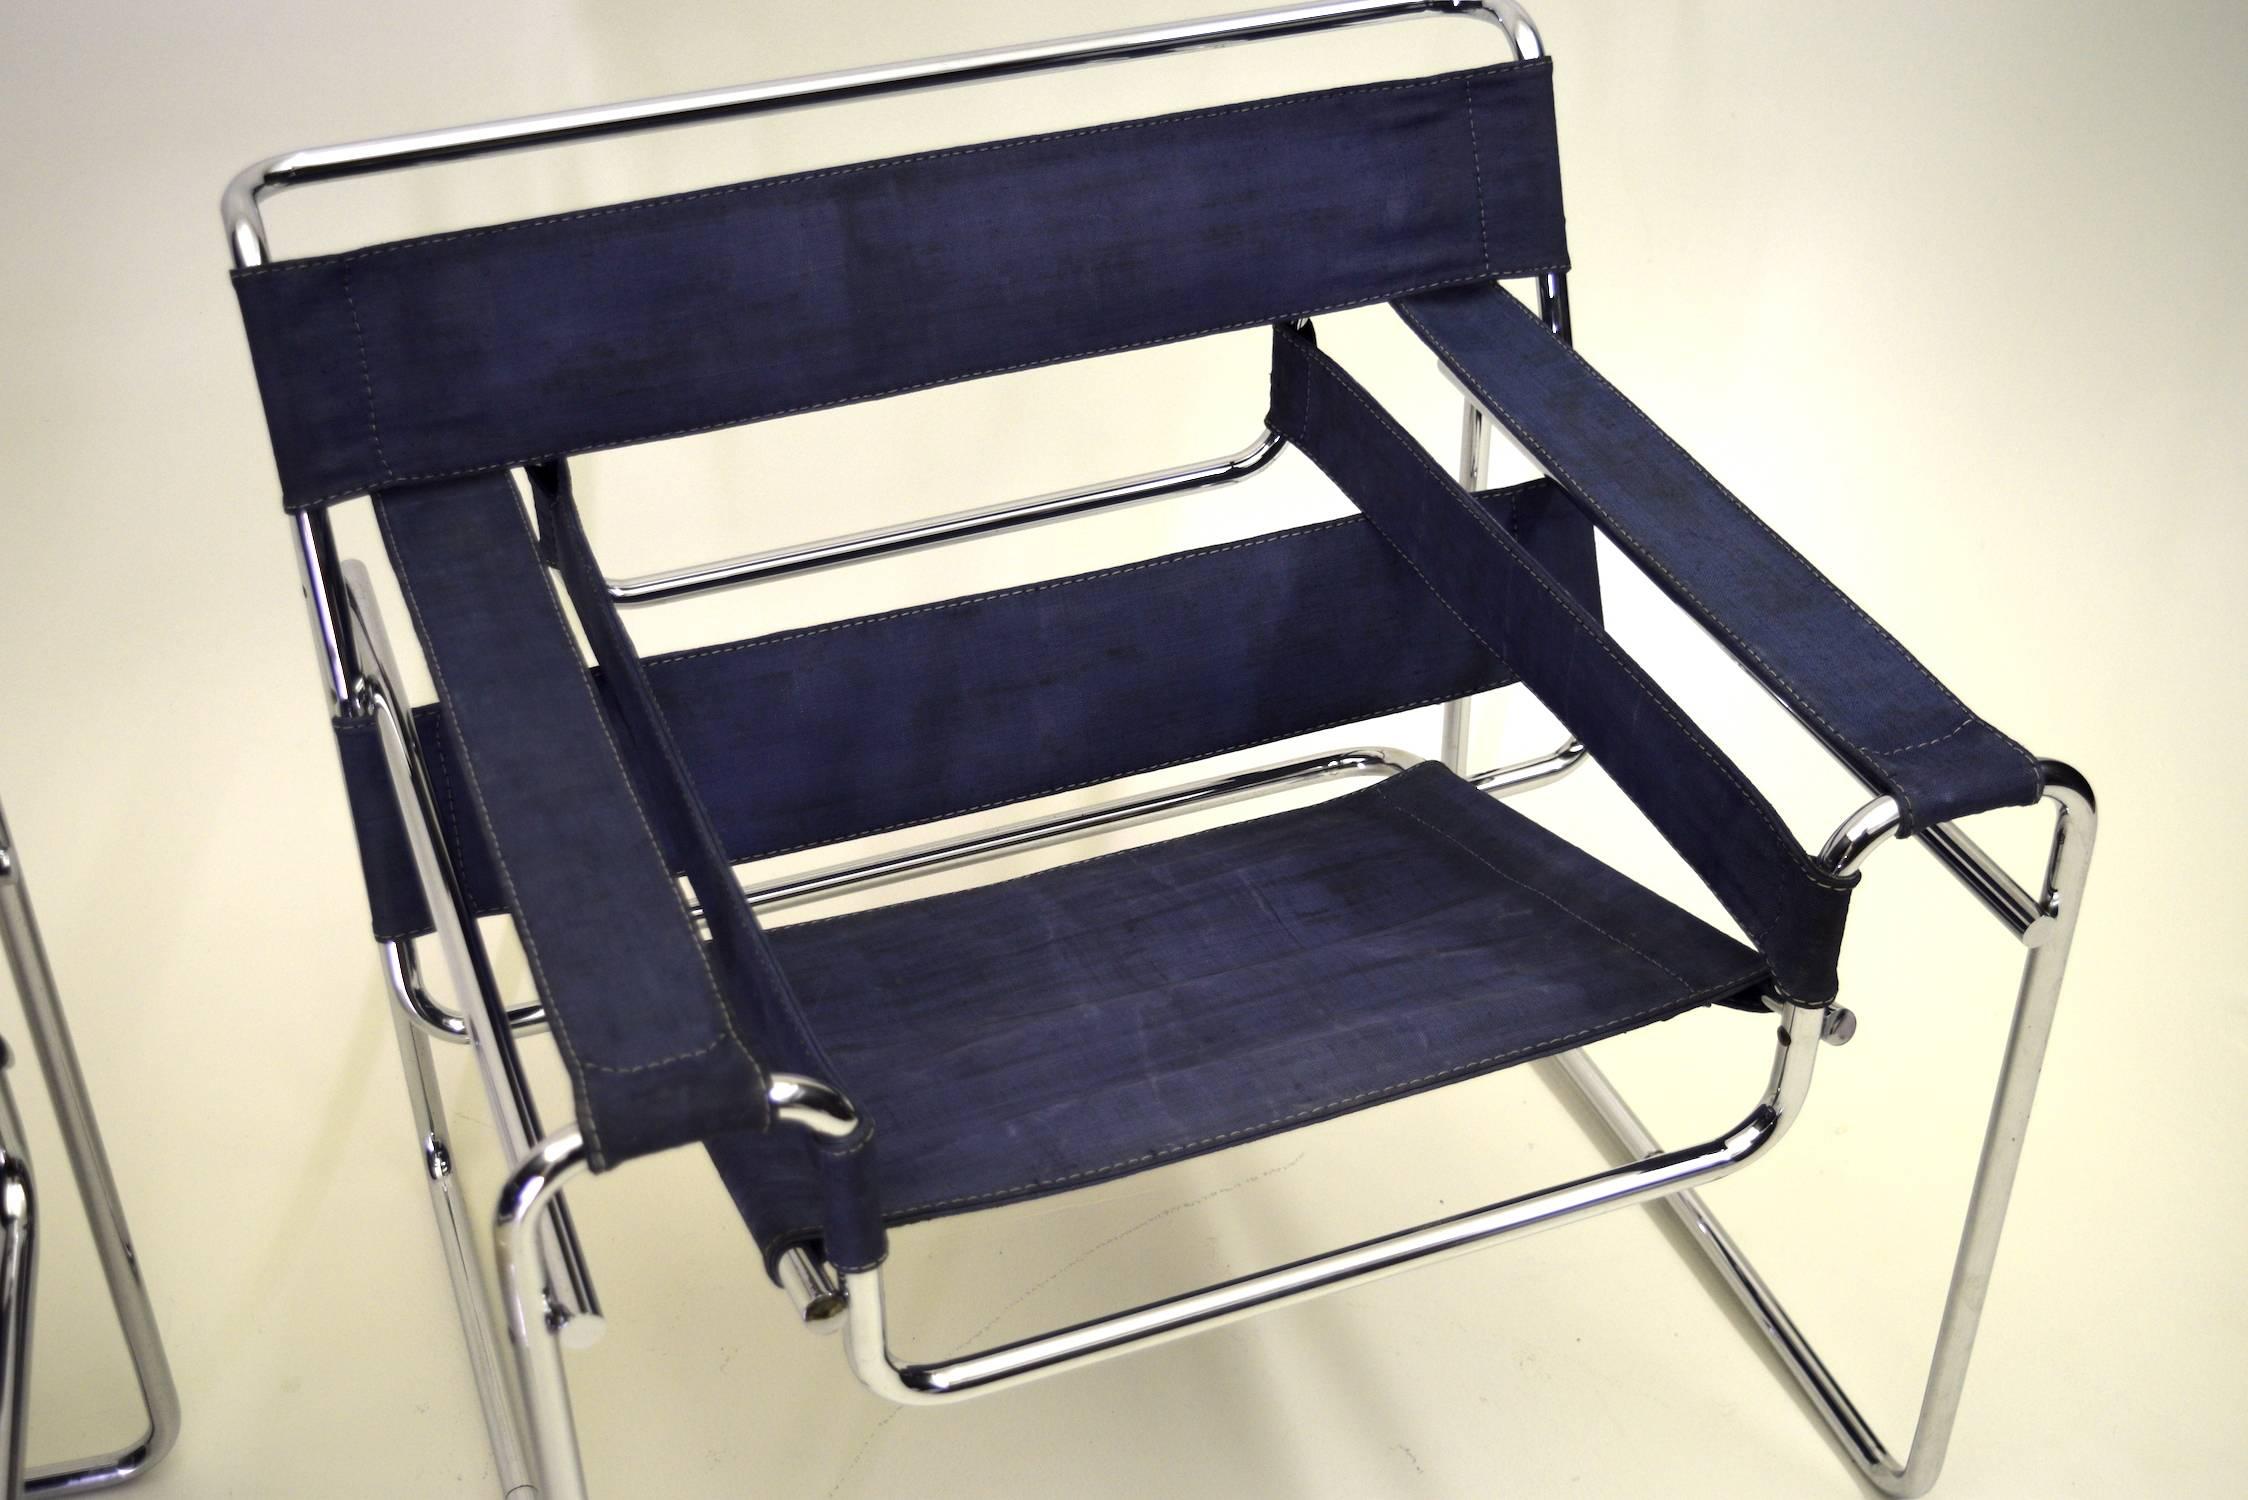 Blue canvas - not denim.

Prior to Knoll collecting the license in 1968, Gavina of Italy was the license holder for the production of the Wassily chair by Marcel Breuer.

In 1962 Gavina did a one-off limited edition of the chairs in canvas as a